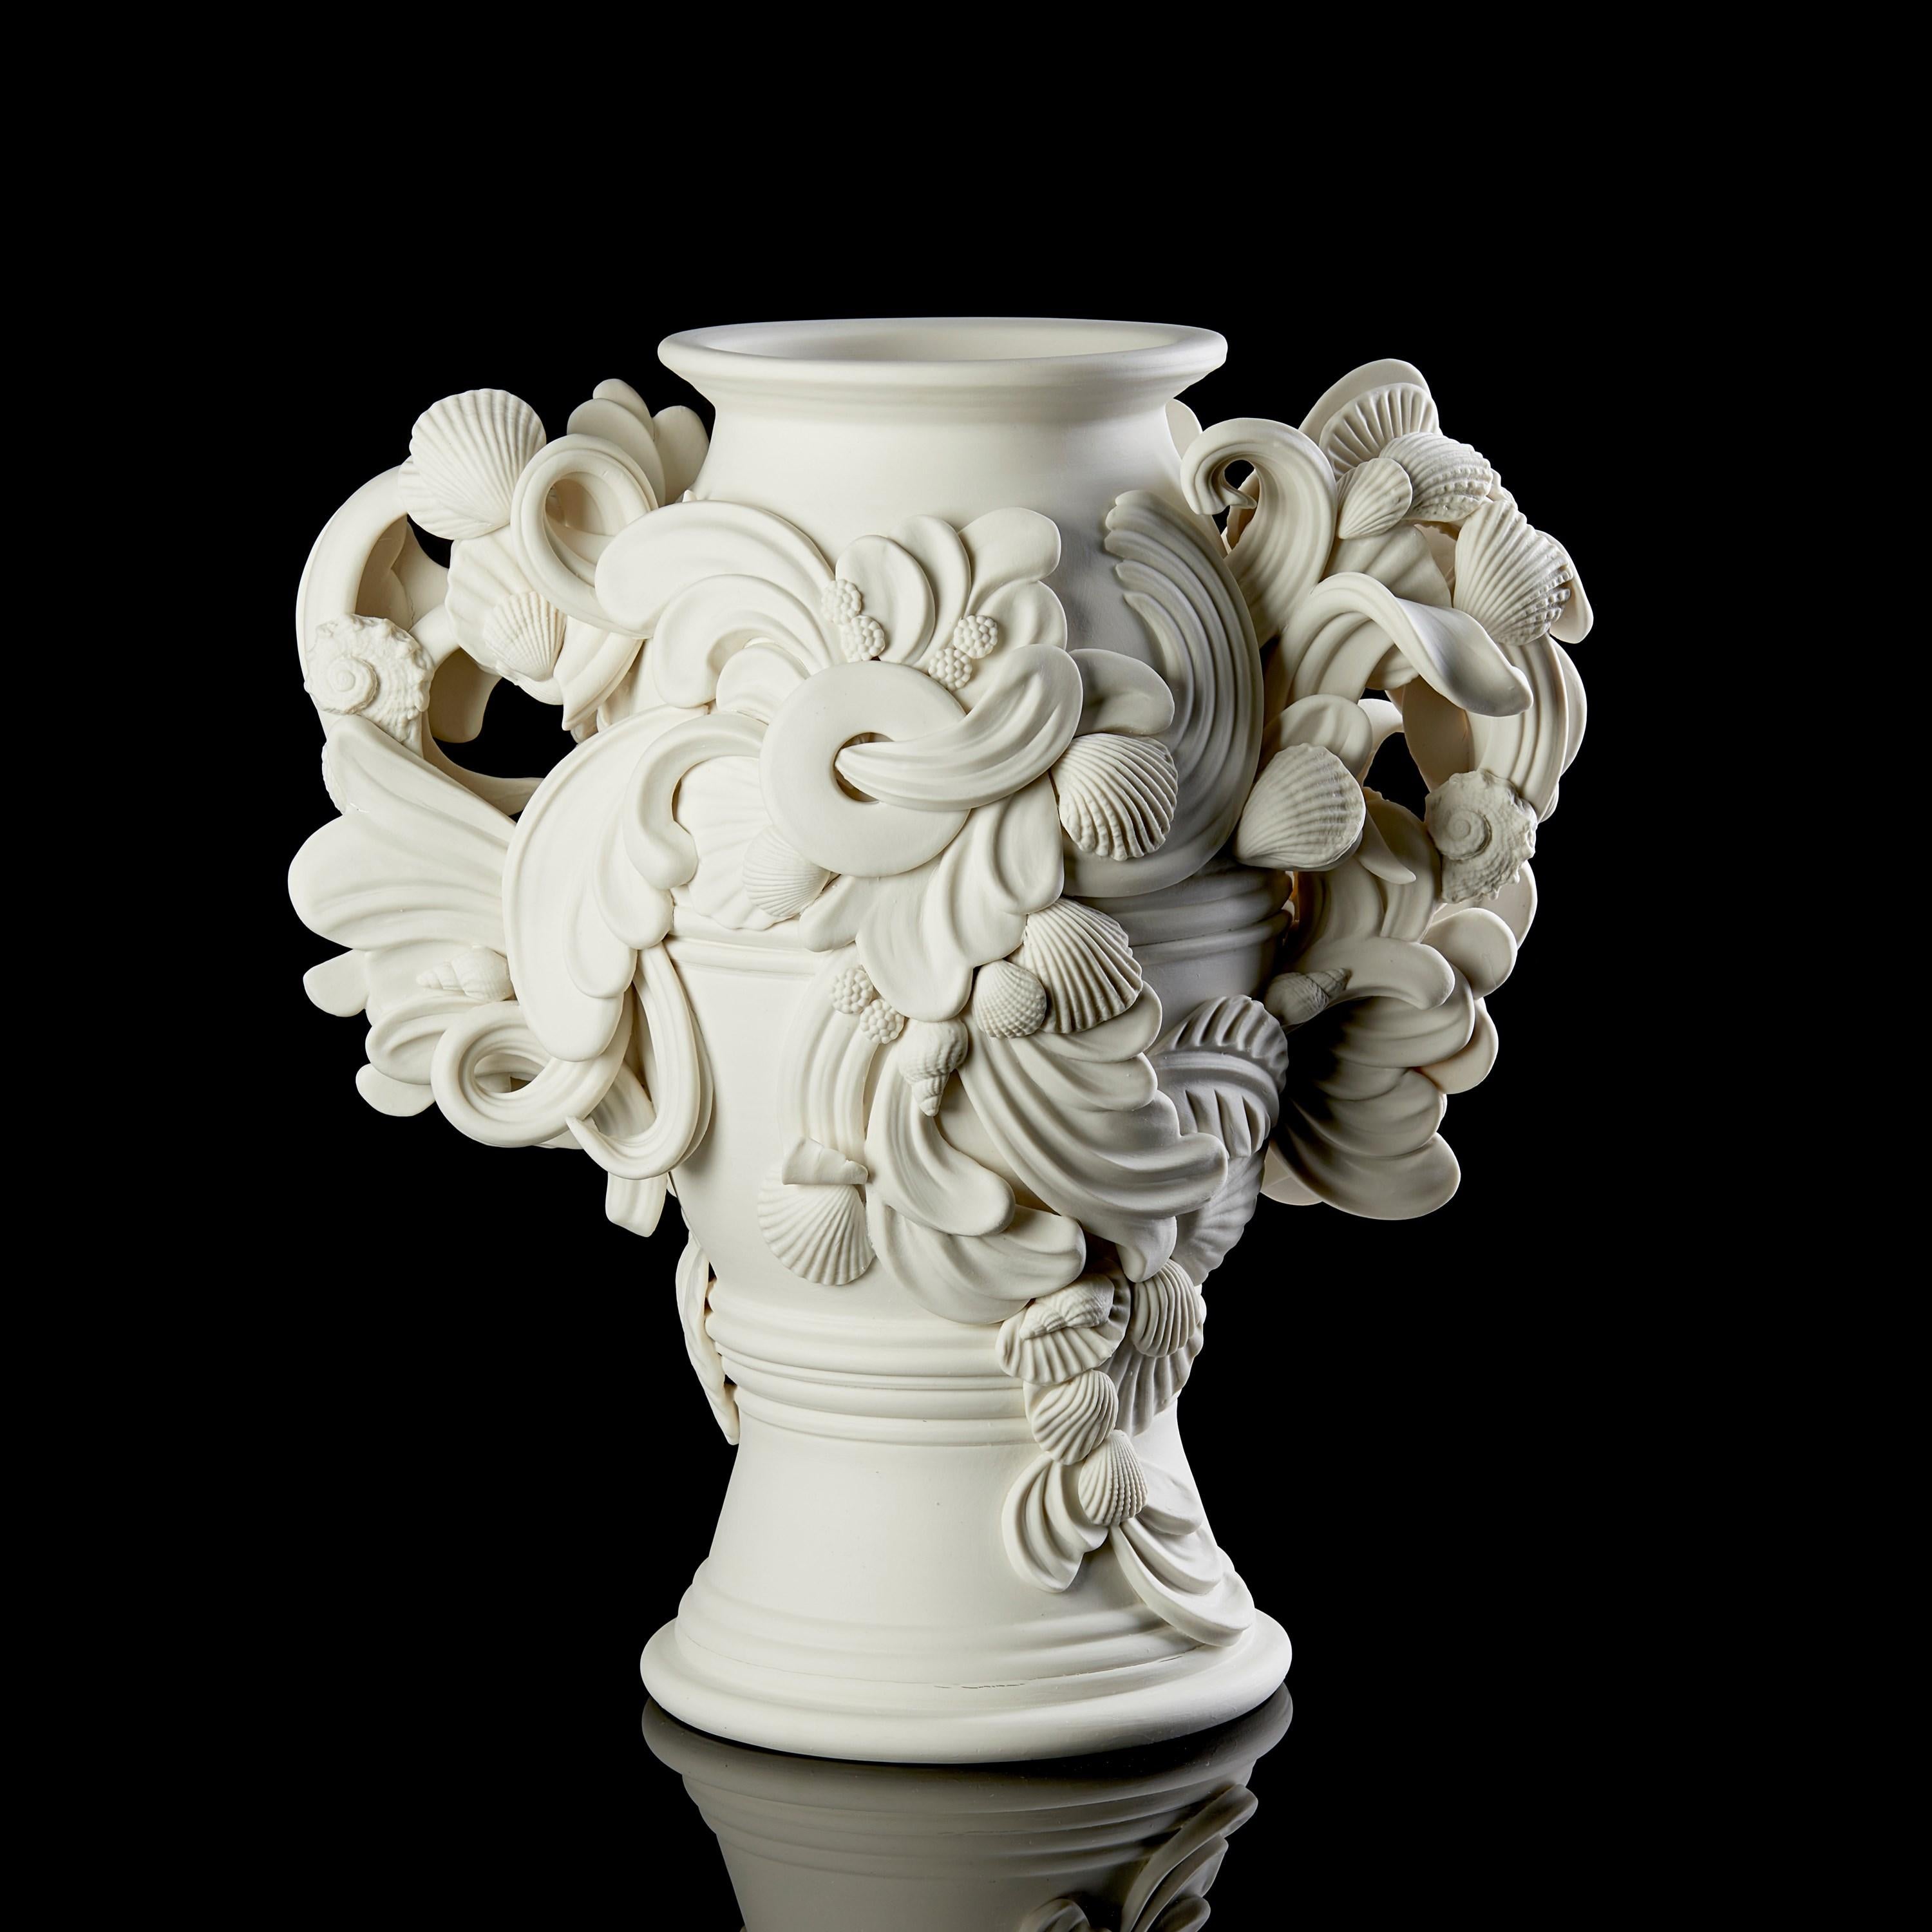 Porcelain Rocaille IV, rococo inspired porcelain vessel with swirls & shells by Jo Taylor